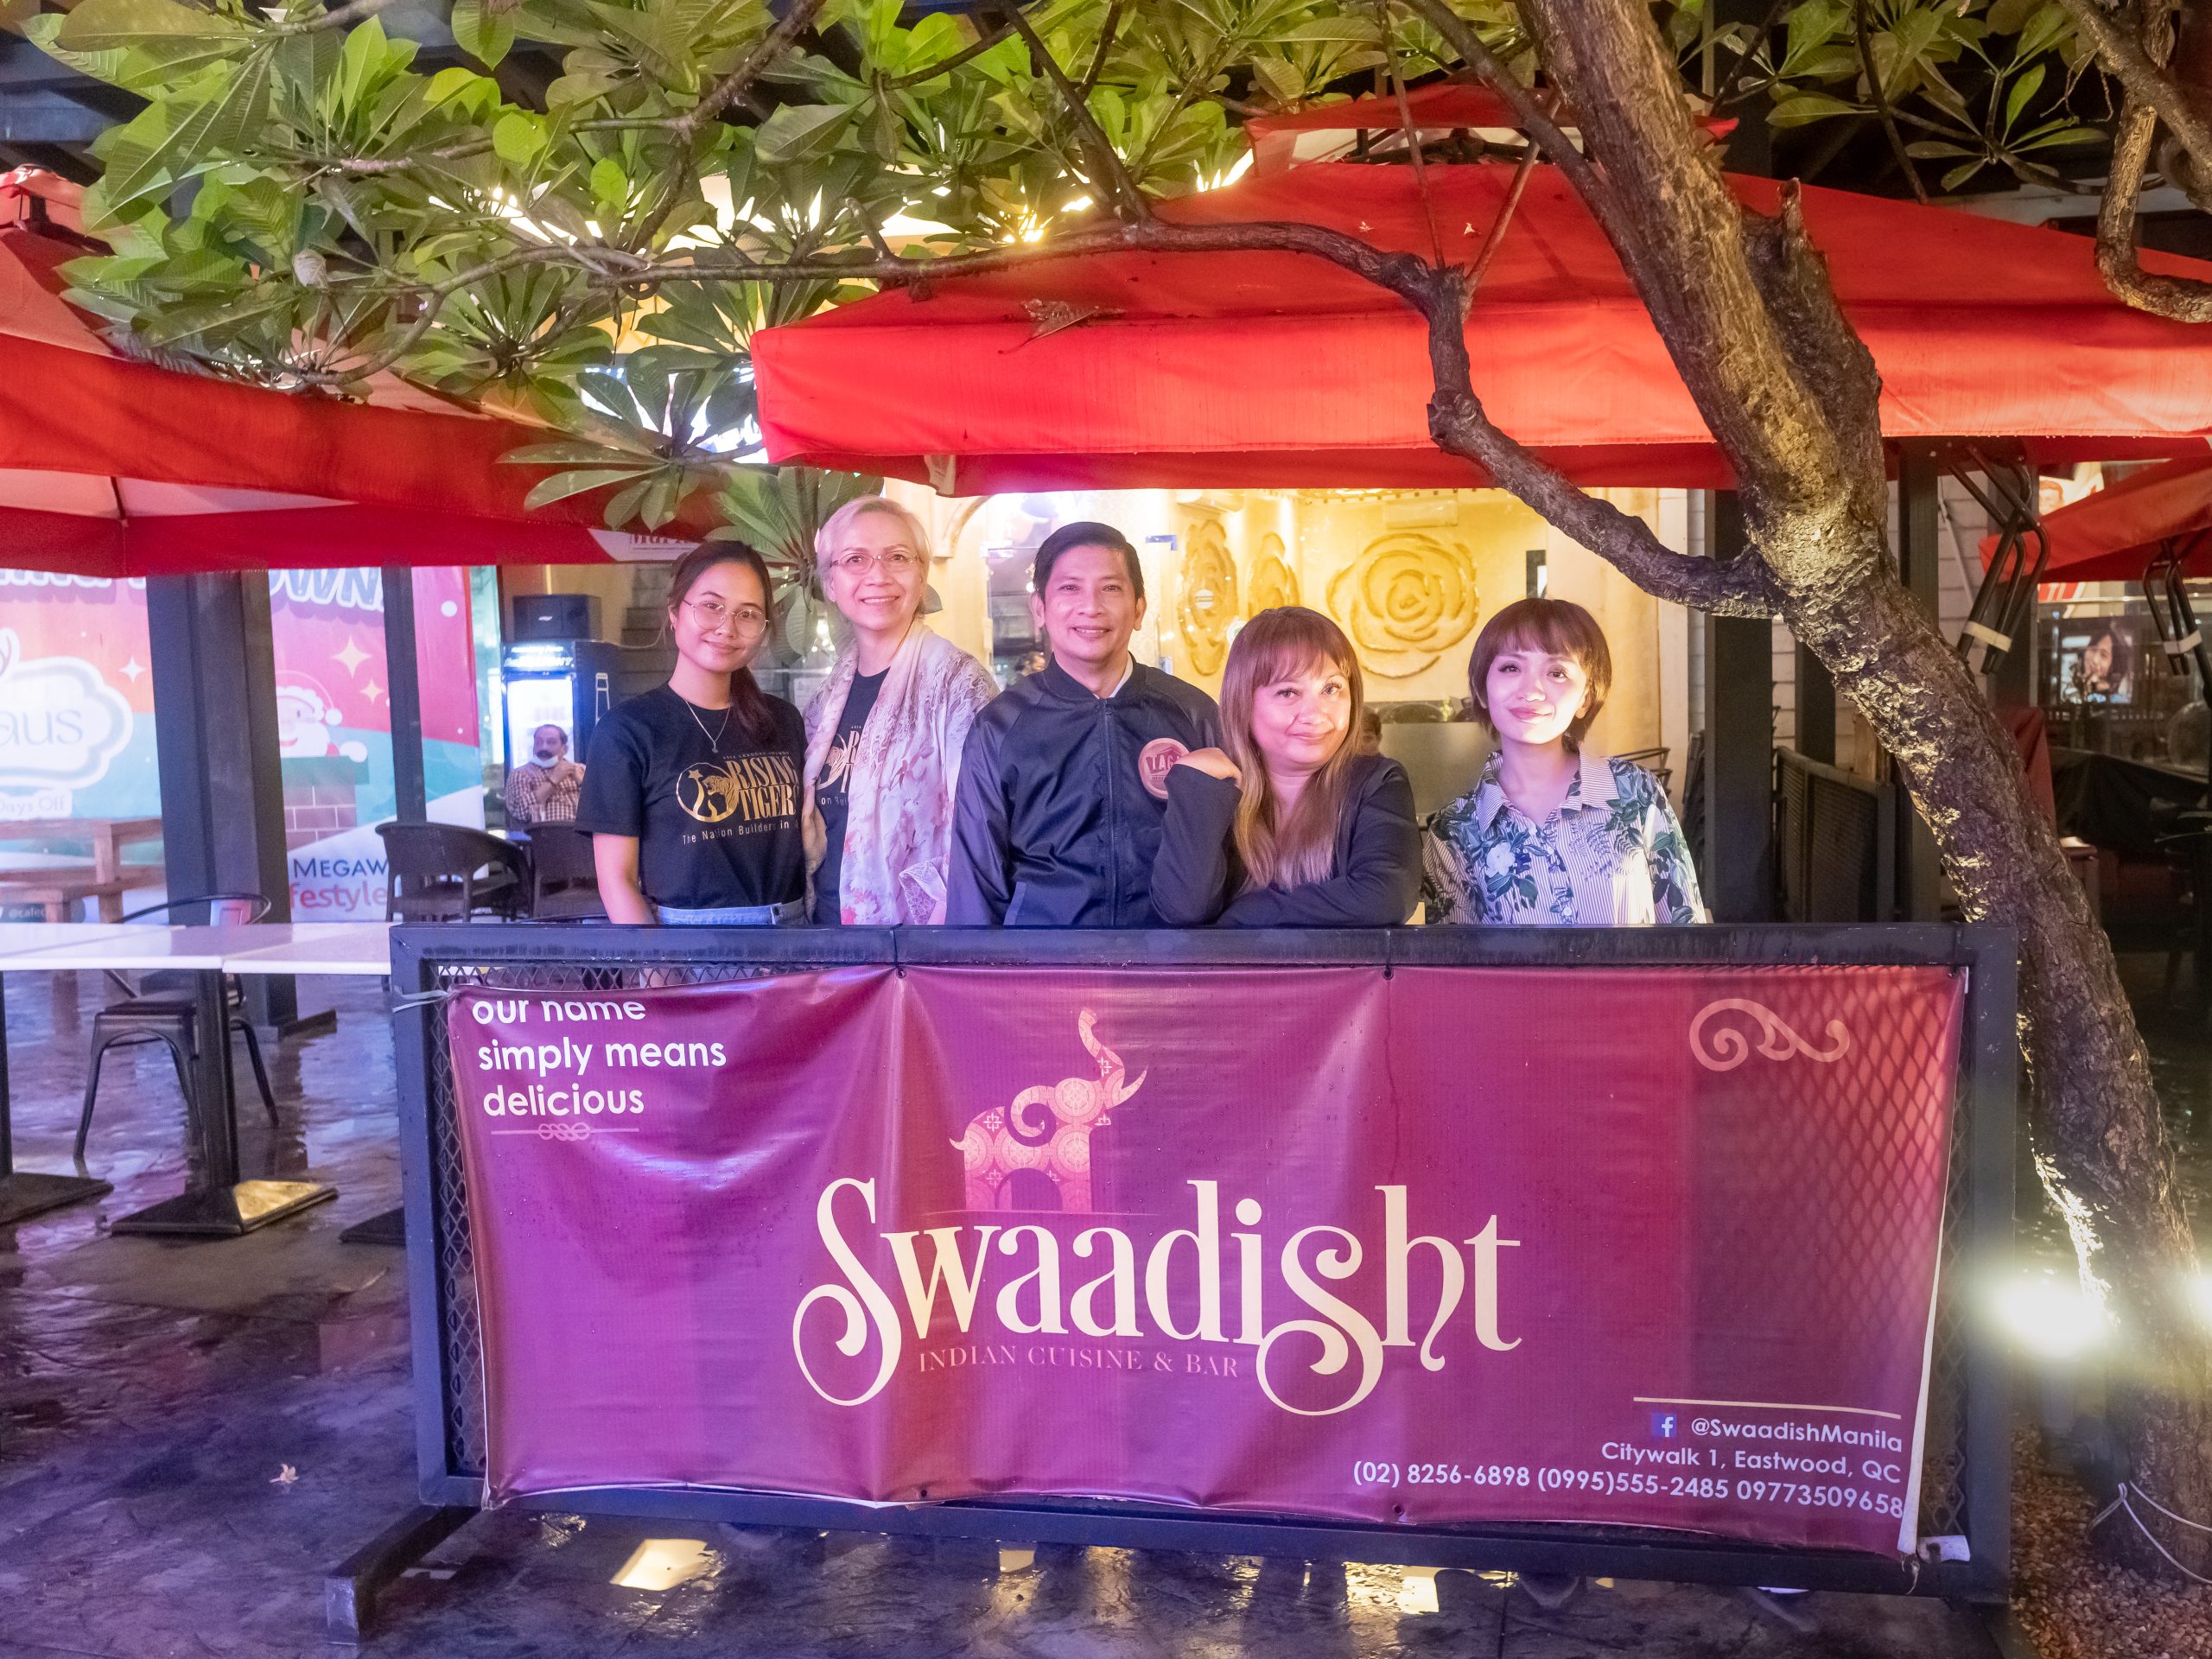 Swaadisht: The spot to get that Indian cuisine fix